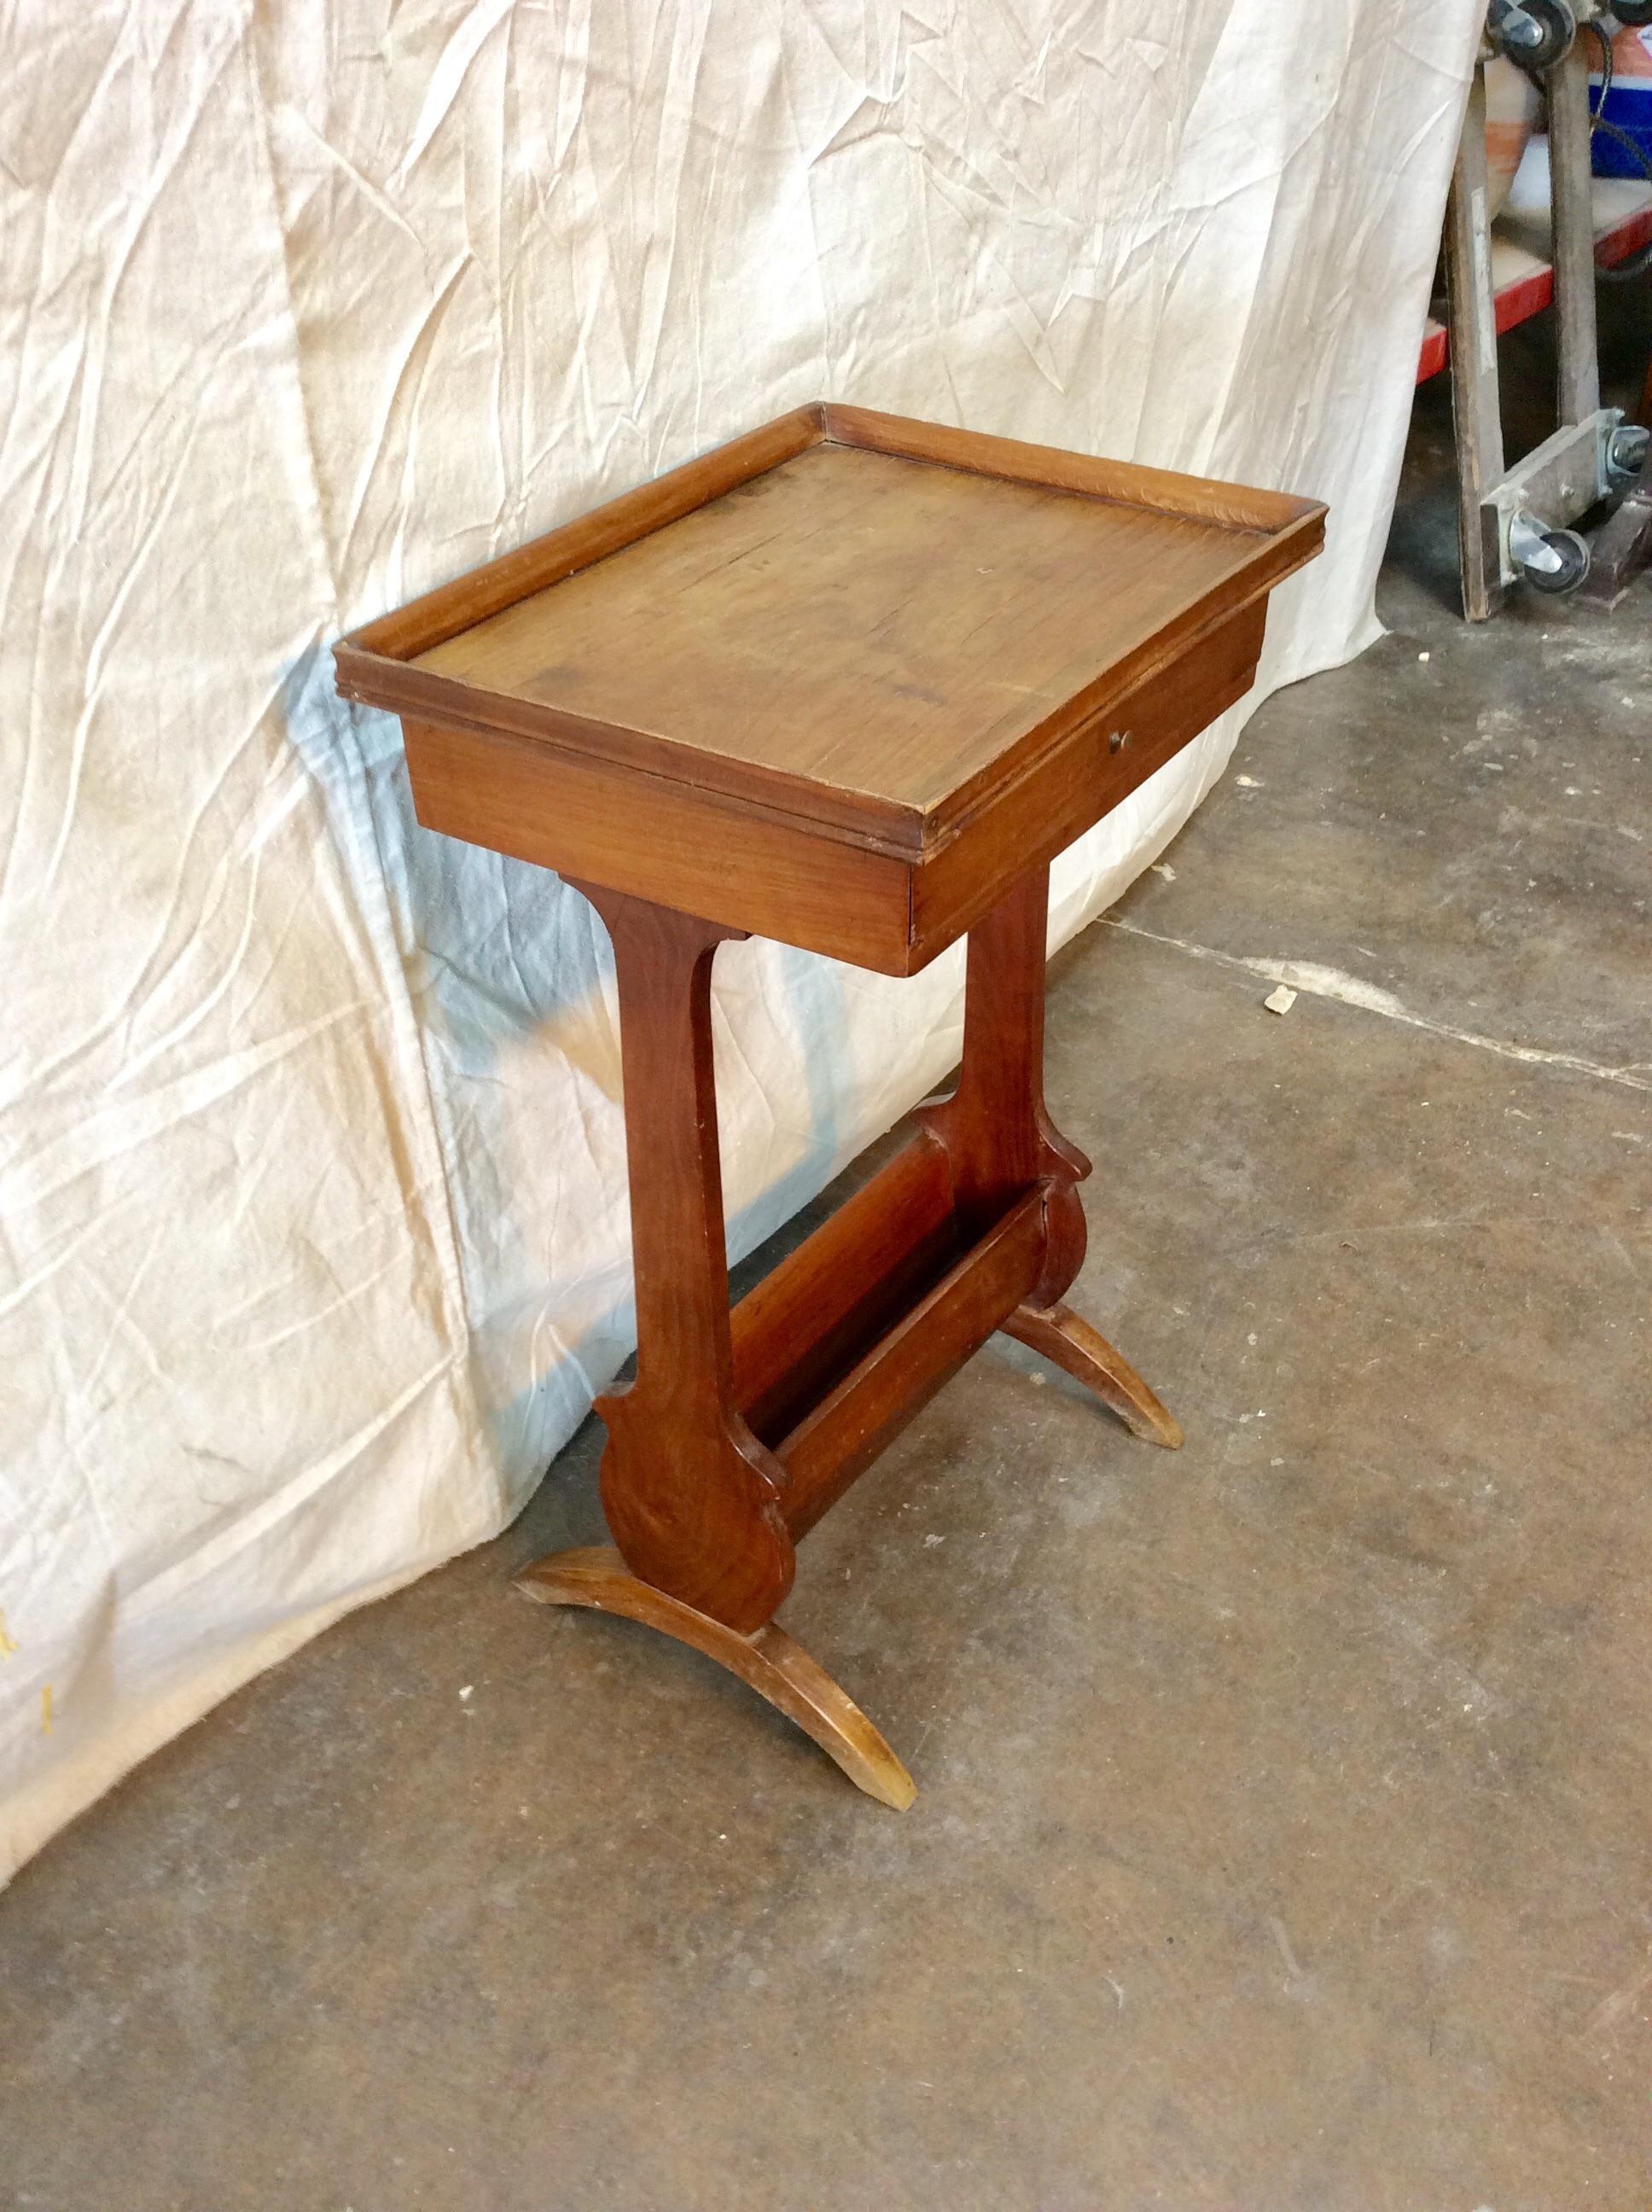 This petite walnut table has one drawer and a small storage space on the bottom, possibly for a book or magazine. It would be great beside a cozy chair or perhaps in a bedroom. Vintage from France, ready to find it's place in your home.

15.5